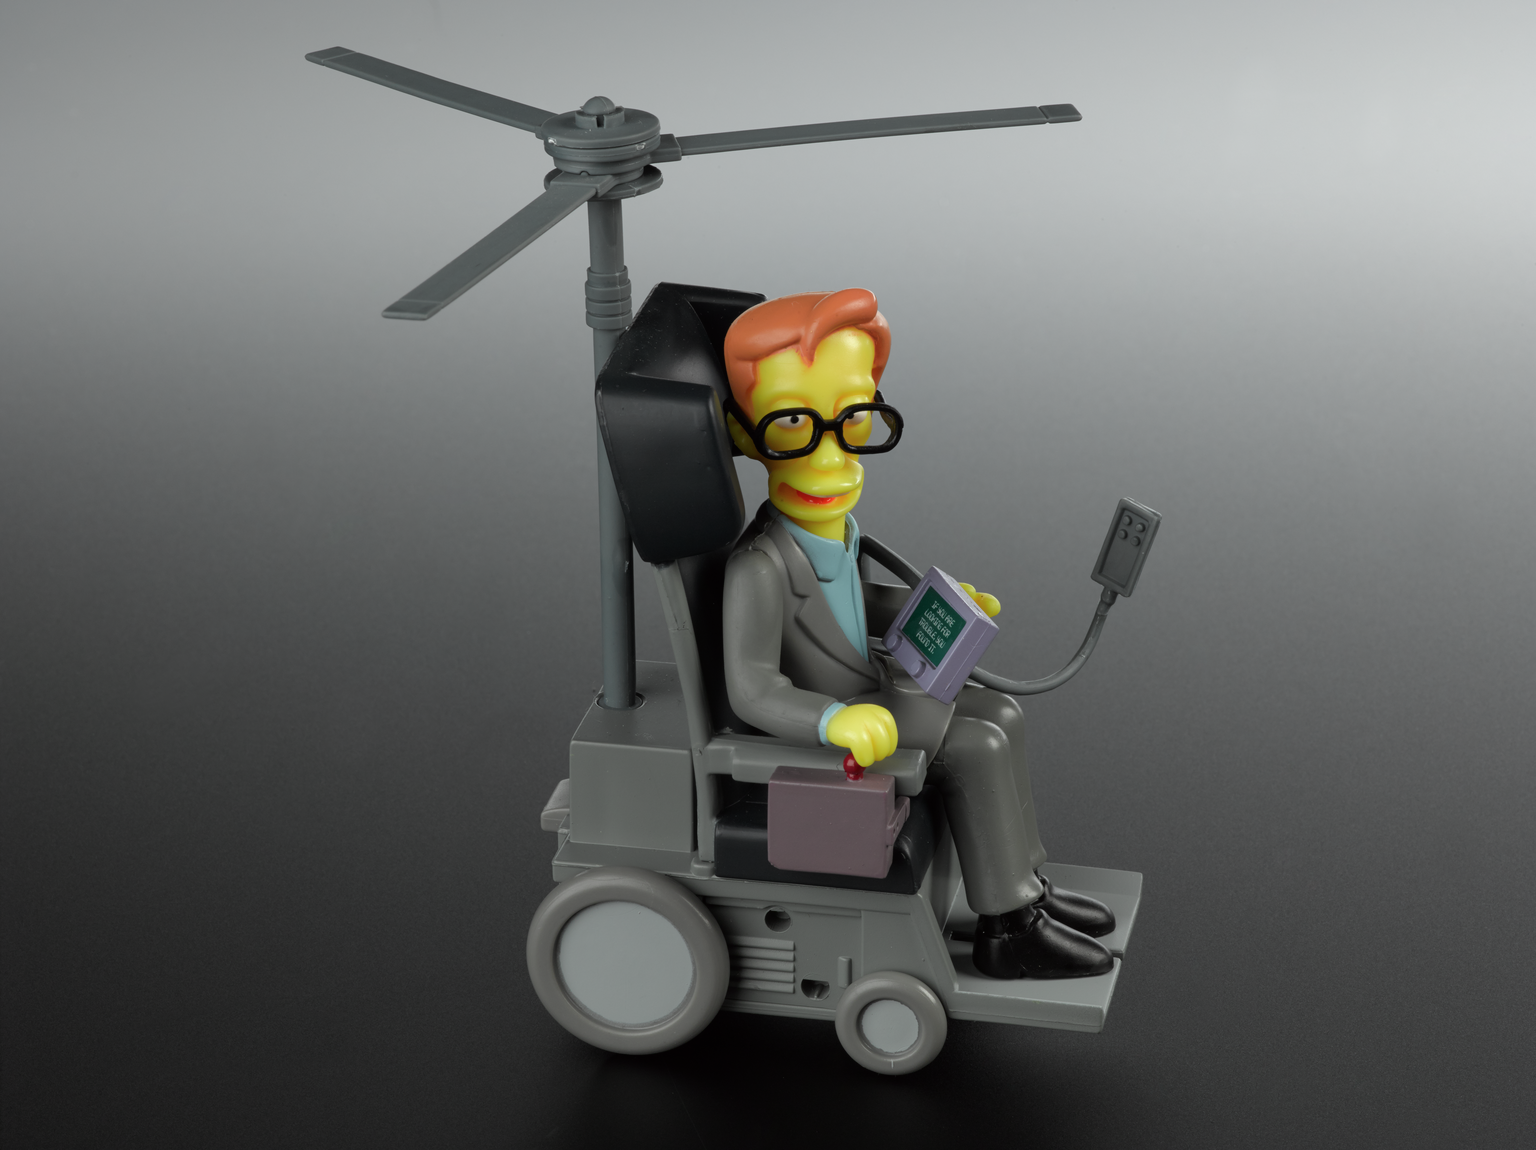 The Simpsons World of Springfield interactive figure, Dr Stephen Hawking, c. 2003